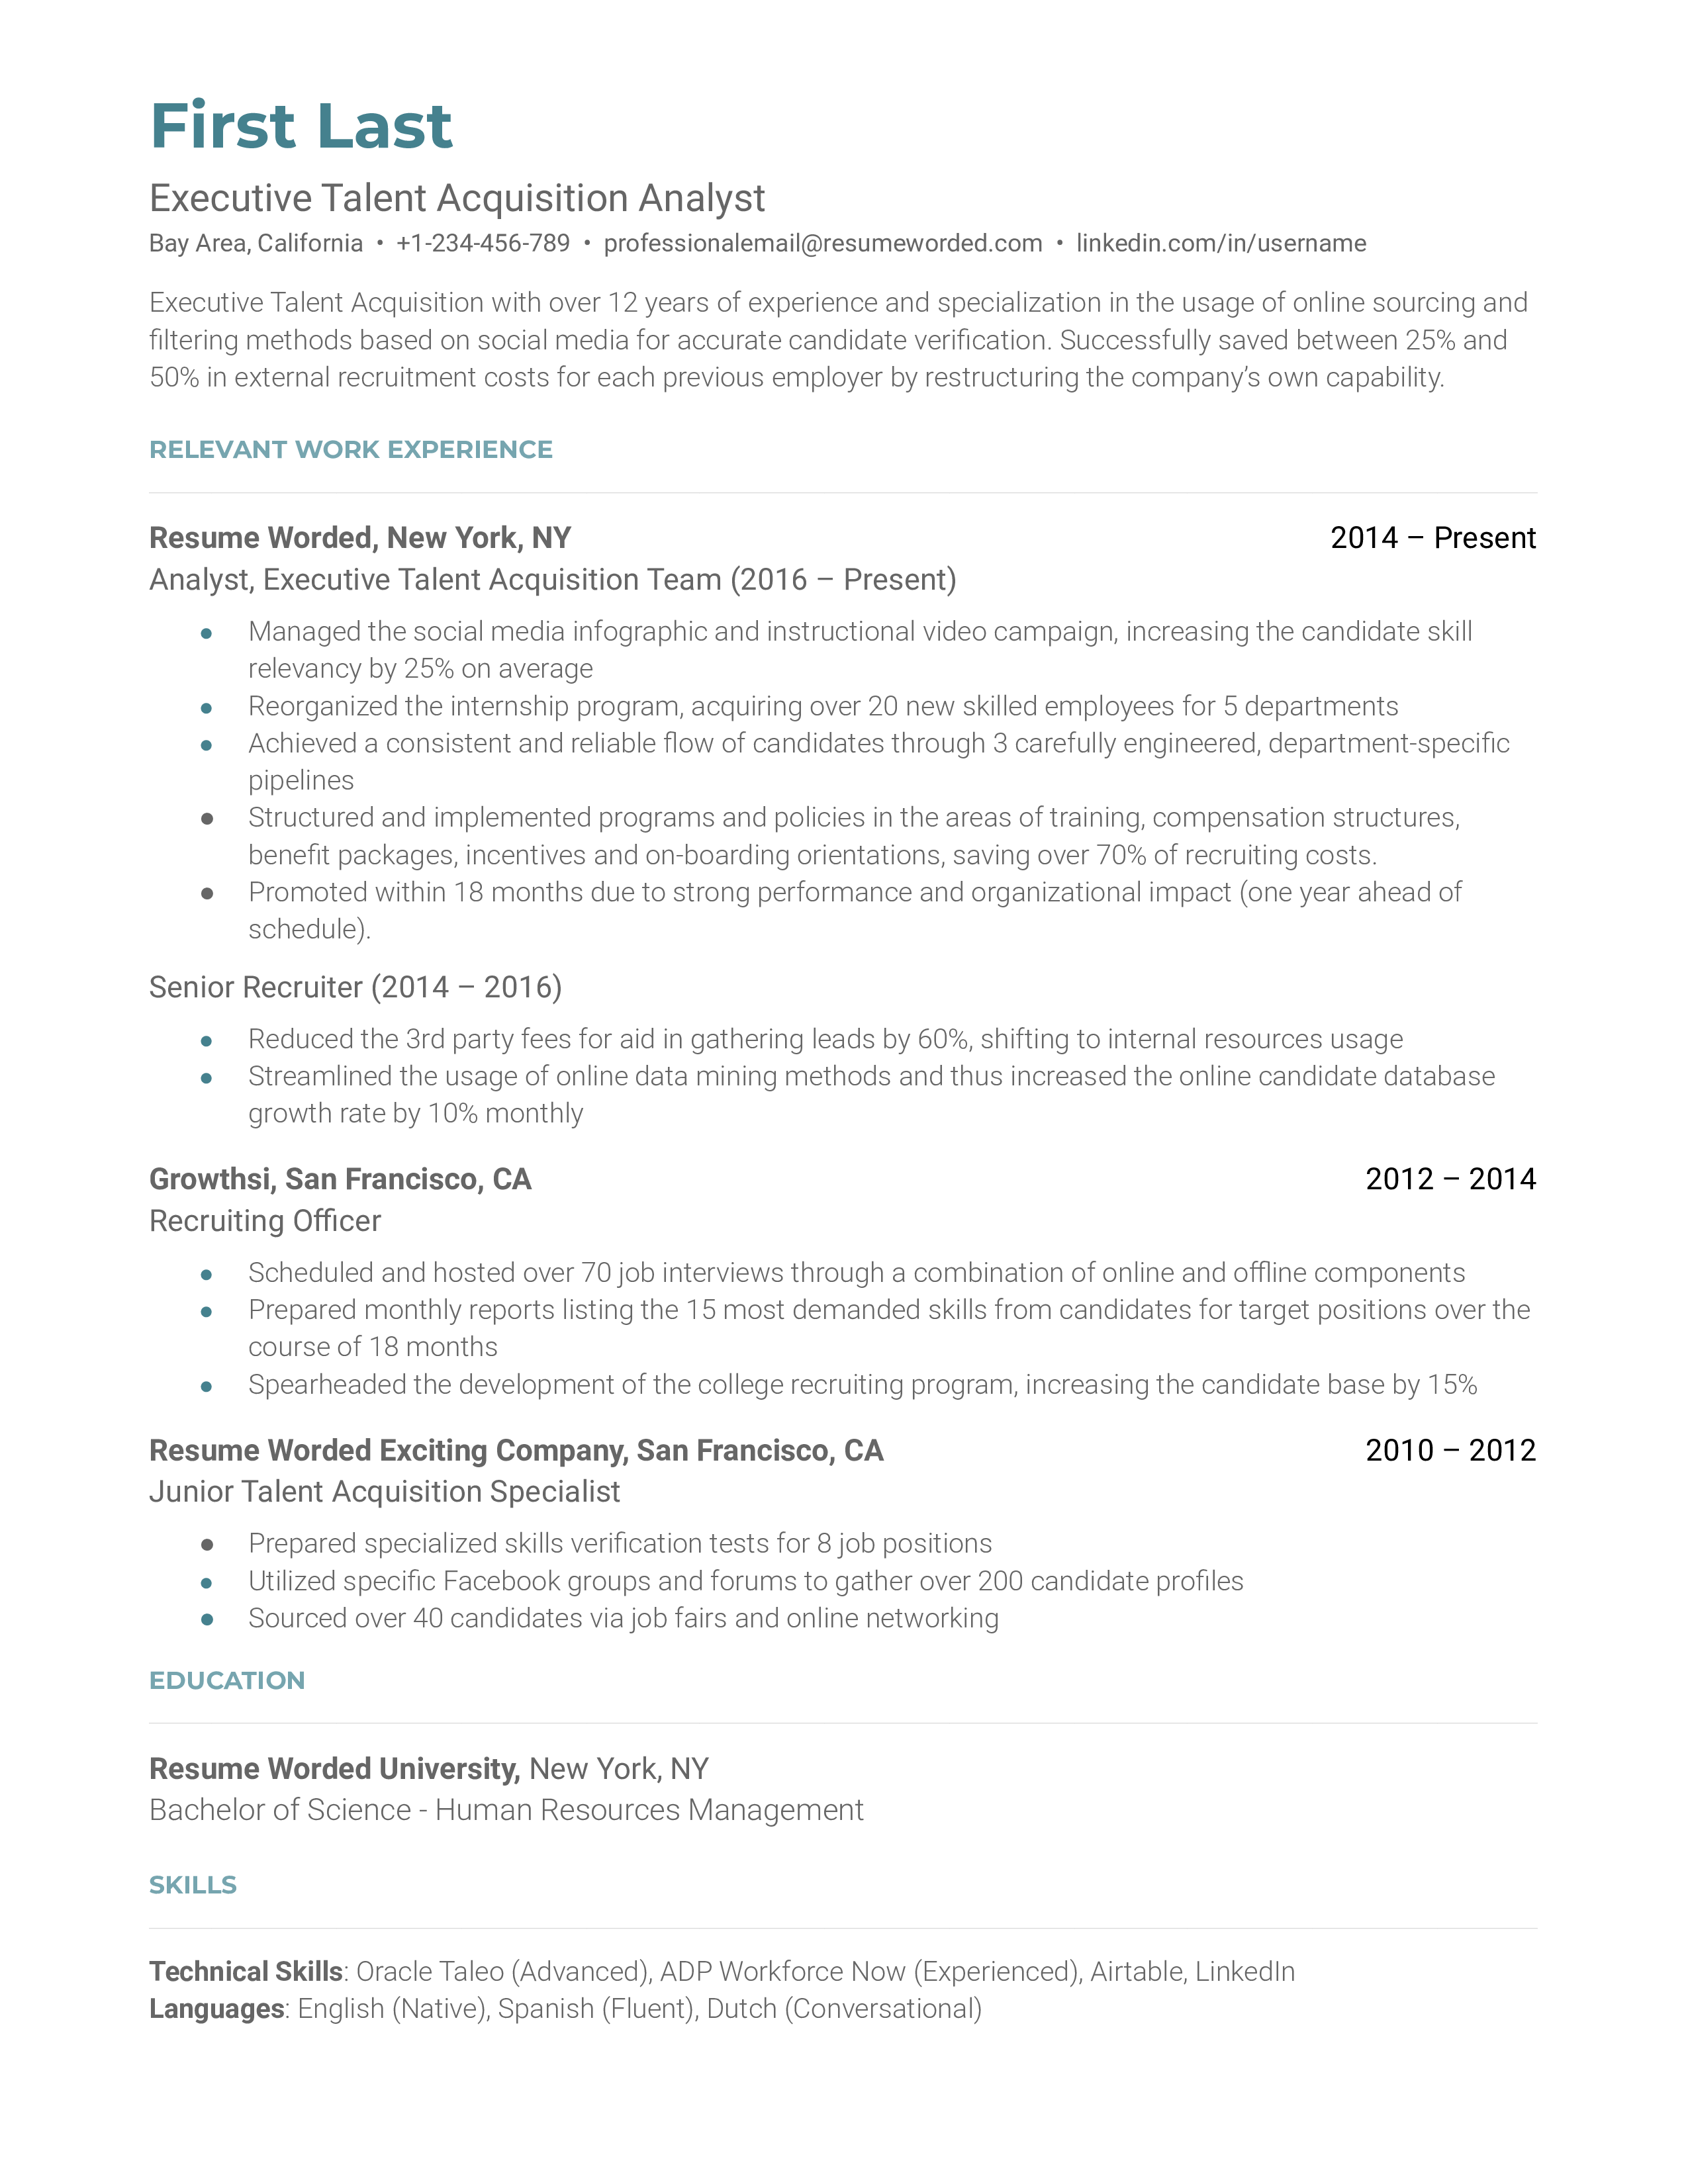 Executive Talent Acquisition Analyst Resume Template + Example